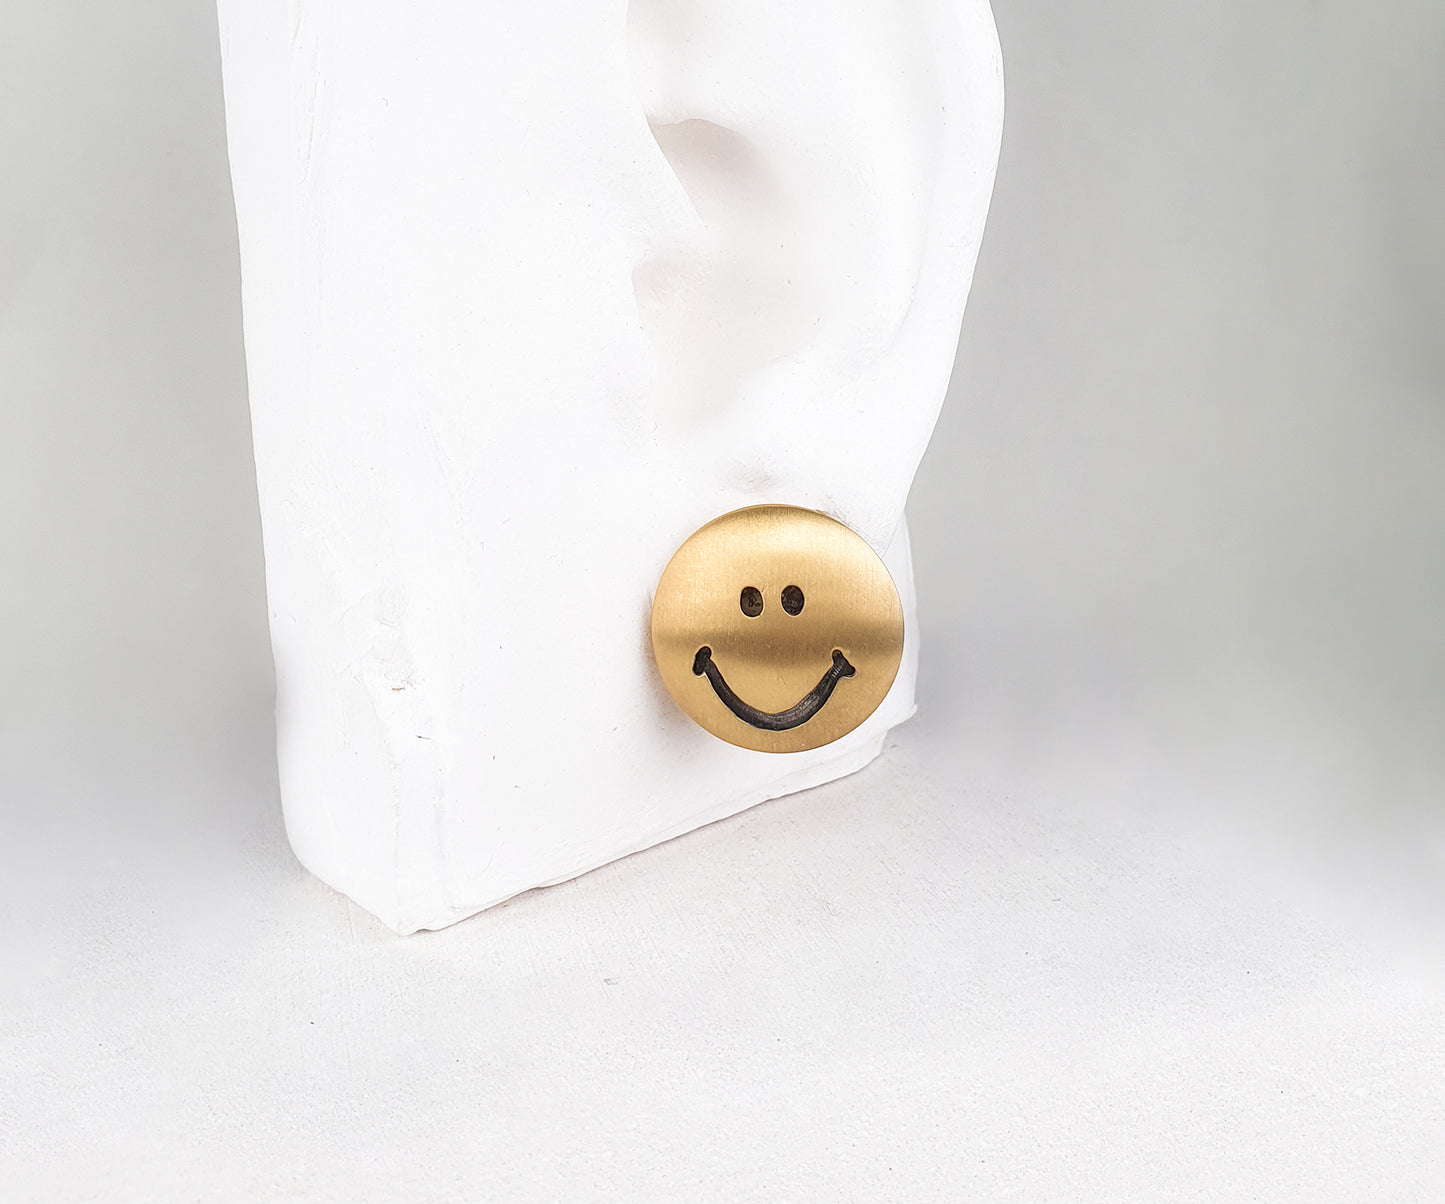 Upcycled Smiley Clip On Earrings in Gold Plated Silver